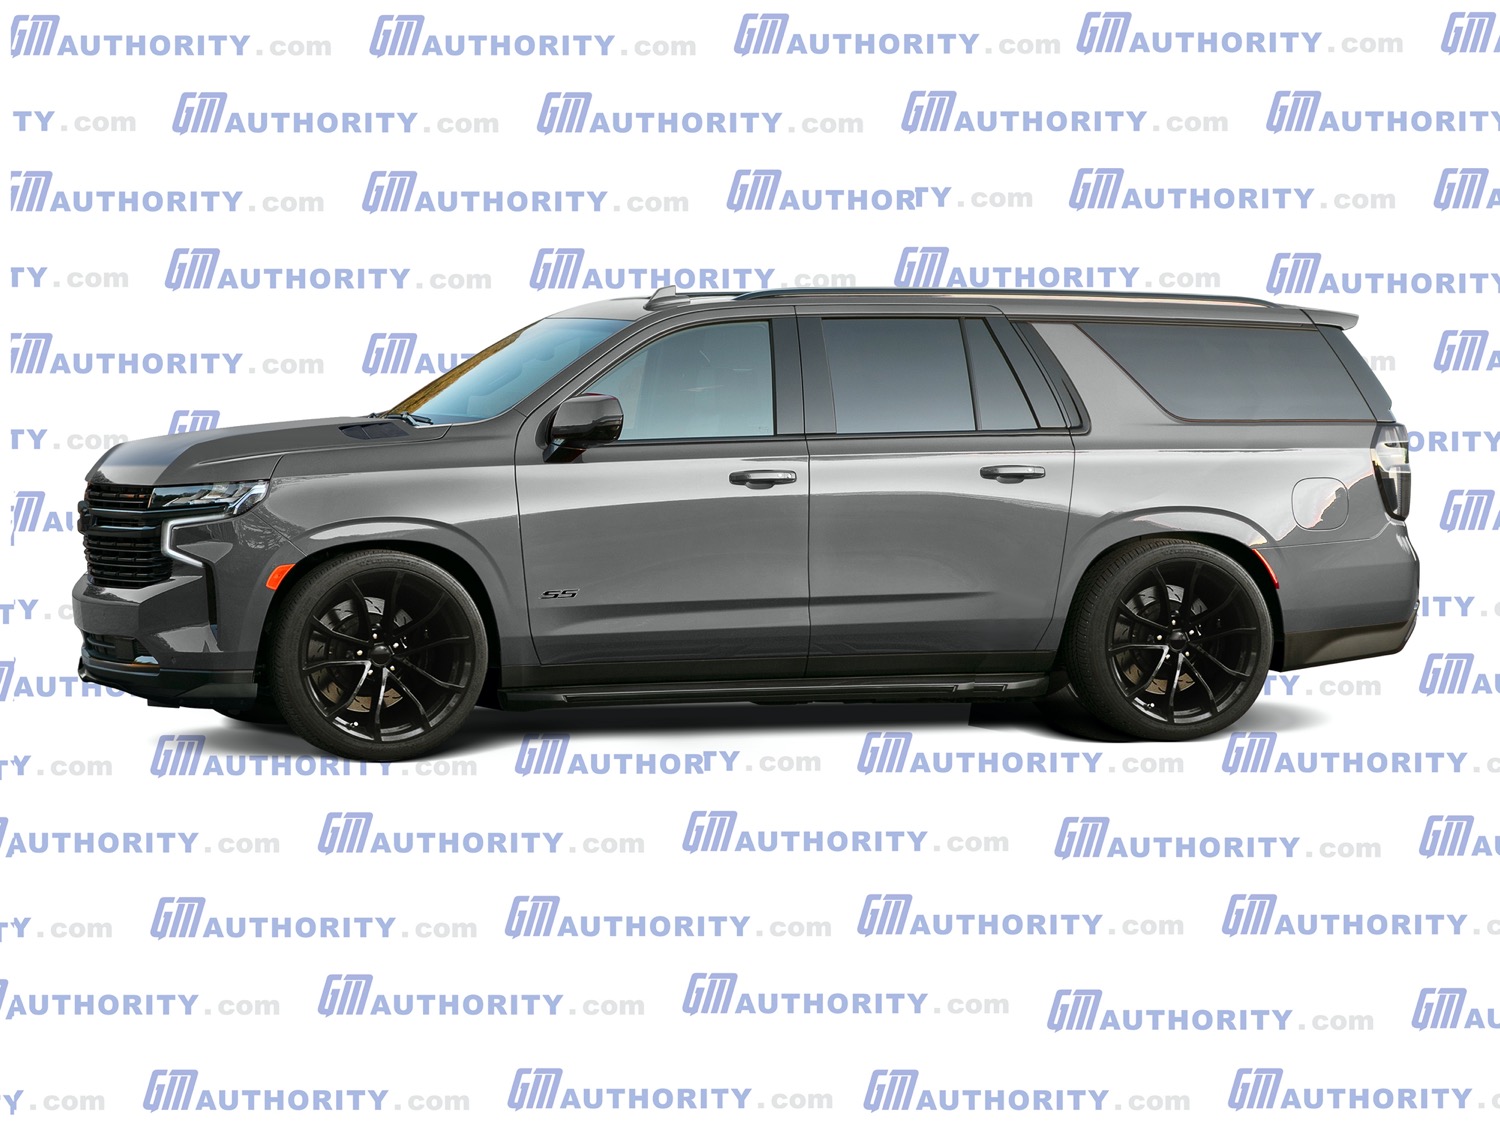 8 Chevy Suburban SS Rendered  GM Authority